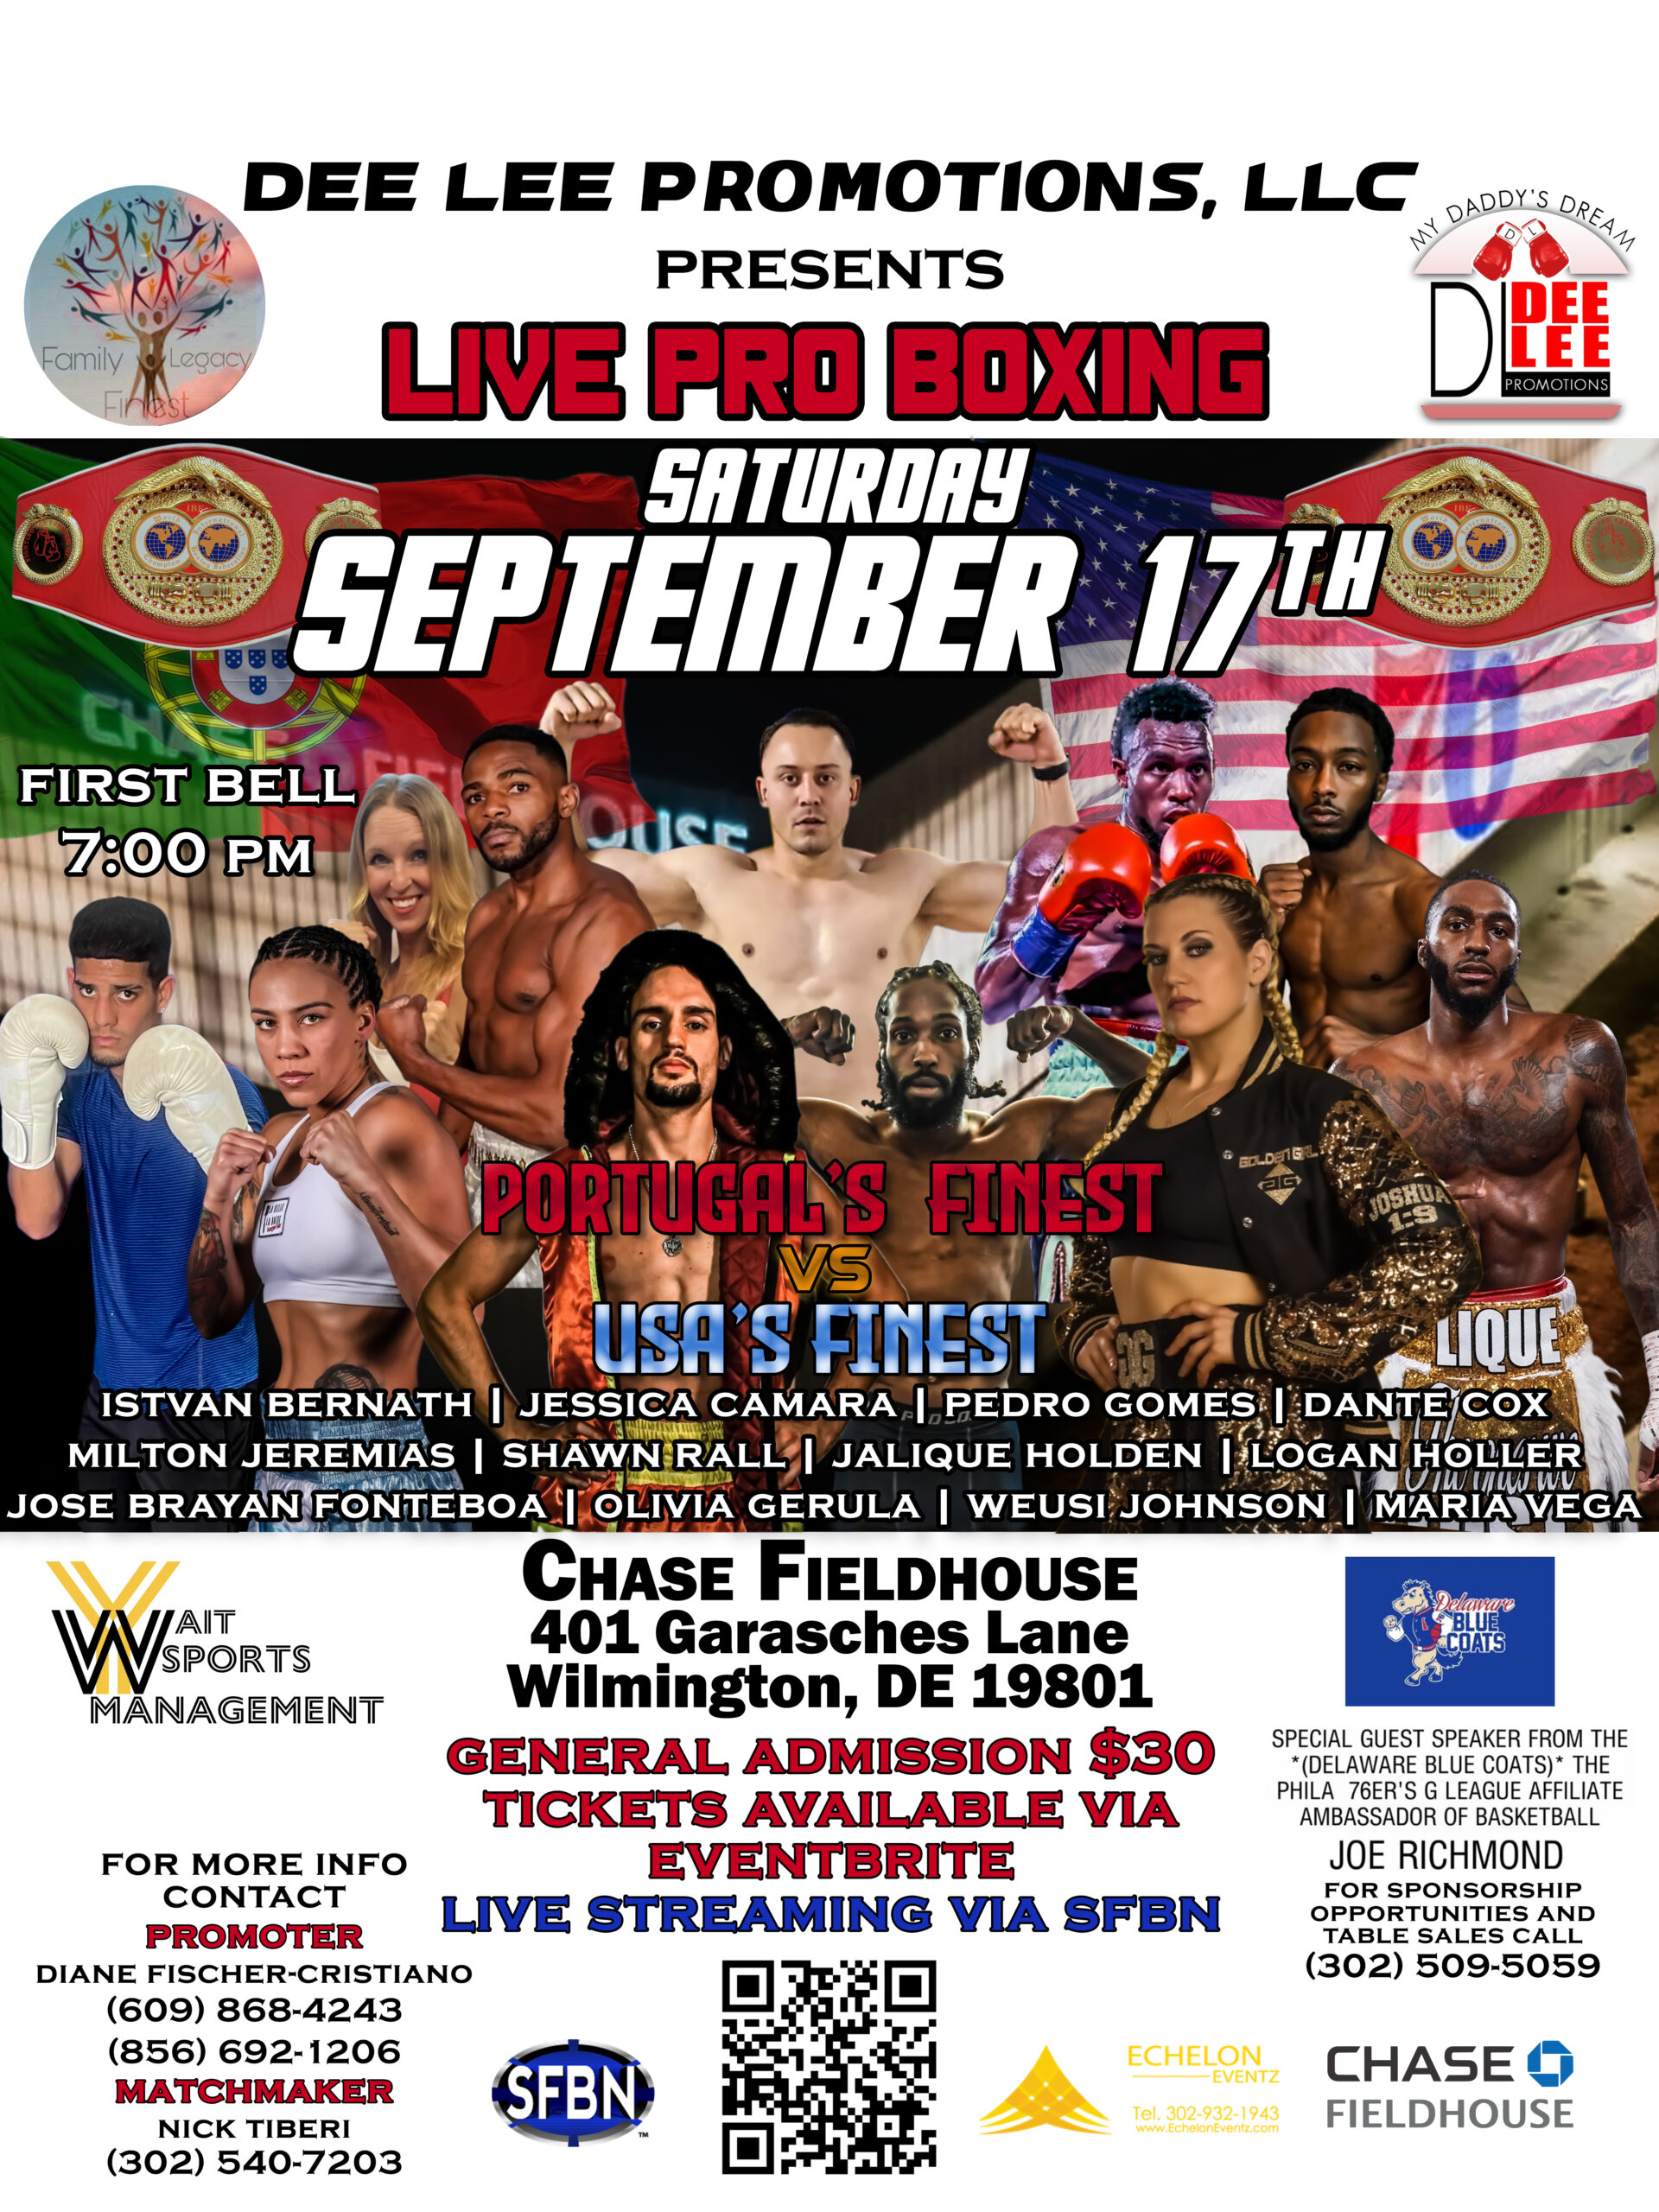 Dee Lee Promotions, LLC Event Takes Place in Wilmington, DE on September 17th